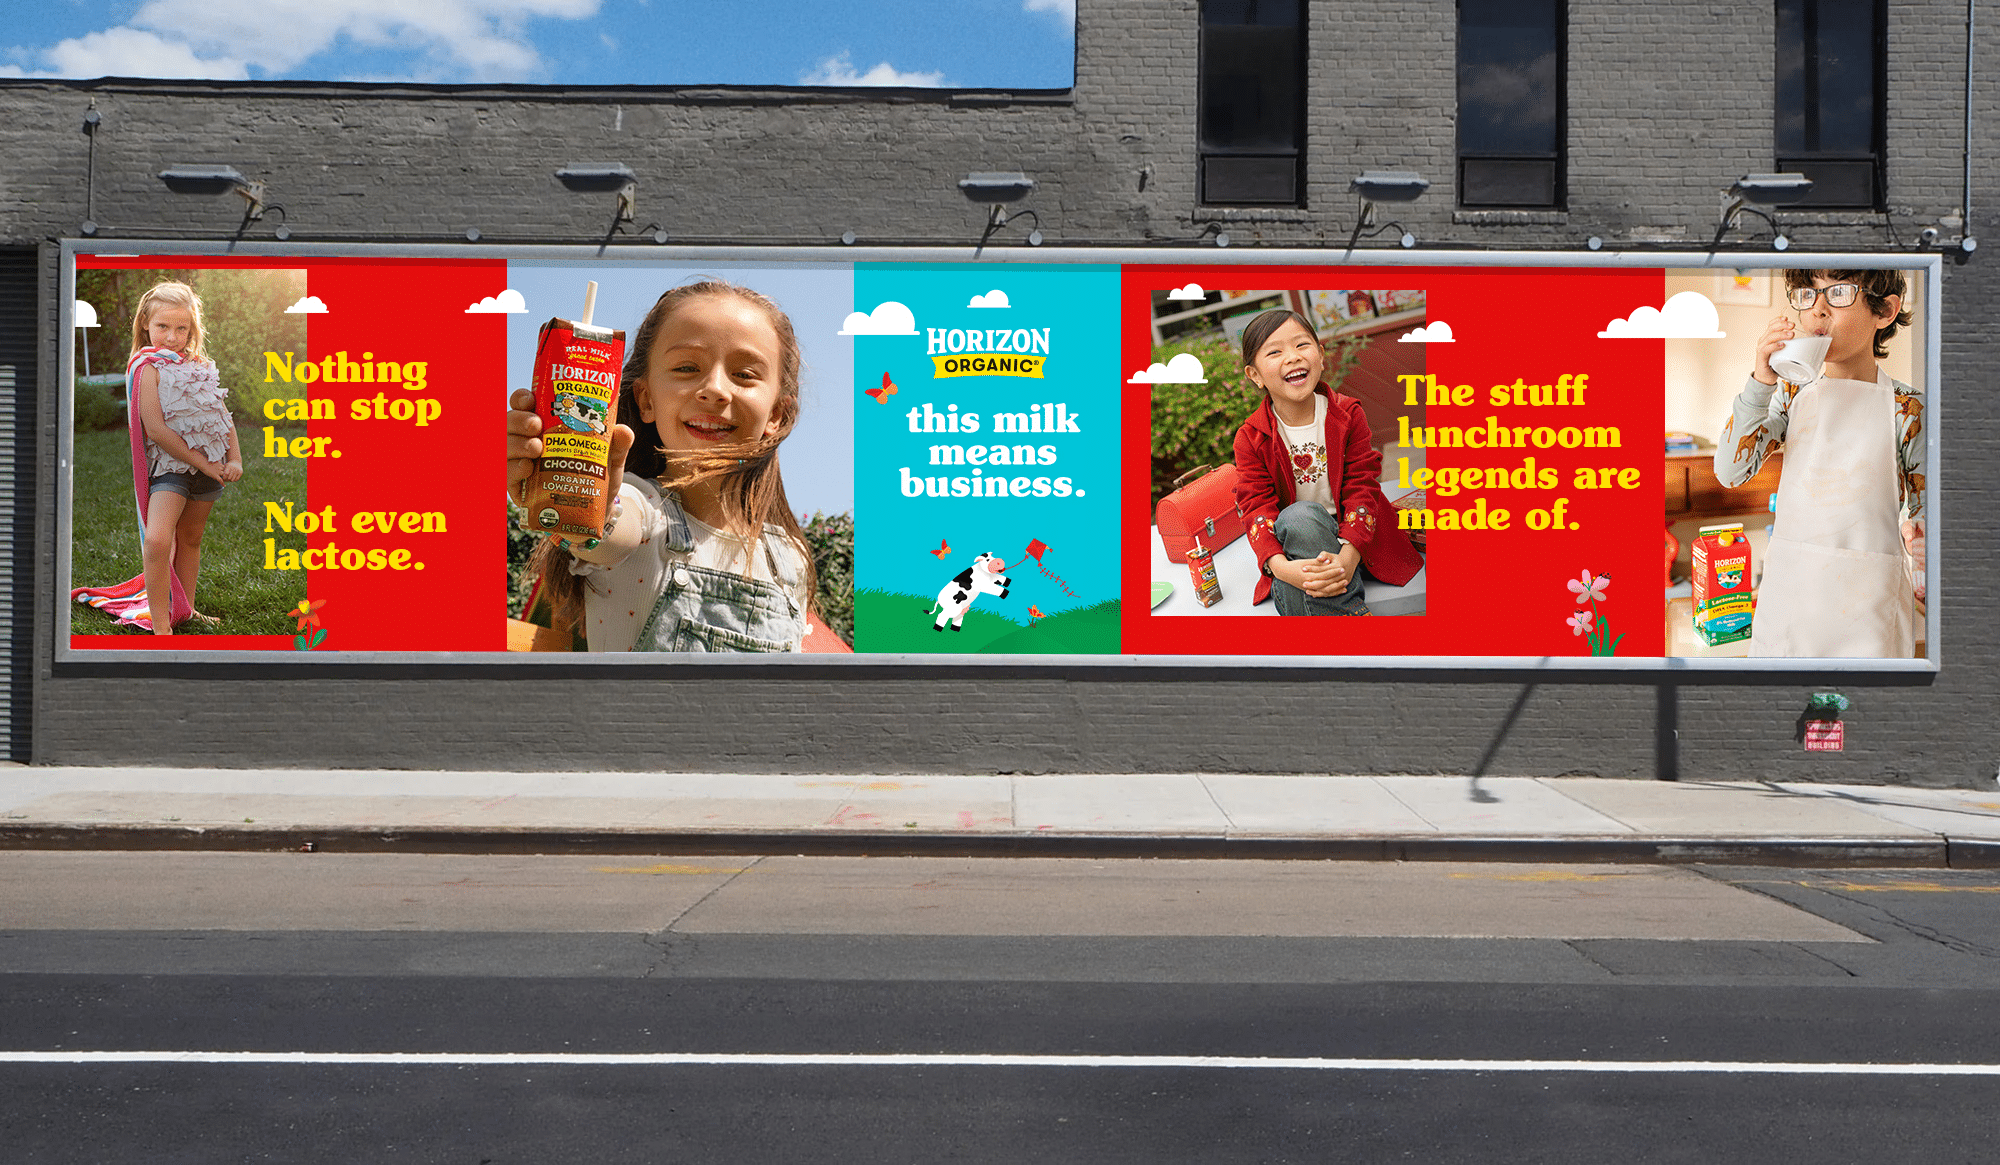 A street scene featuring several campaign posters in a row on a city wall. From the left: a young girl of about 6 years old with blonde hair wearing a towel tied around her neck as a makeshift cape with a sassy look in her eye, standing in a backyard. The headline reads:"Nothing can stop her. Not even lactose." Next poster: an 8-year-old girl with light brown hair holding container of Chocolate Milk. camera. Next: An illustrated image of Happy the Cow, the Horizon Organic brand mascot, as she flies a kite. The headline reads:"this milk means business." Next poster: an elementary-school-aged laughing girl with brown hair and a bright red blazer. next to her is a red lunchbox and Chocolate Milk. The headline reads: "The stuff lunchroom legends are made of." And the final poster features a boy wearing an apron over his jammies and drinking a glass of milk.